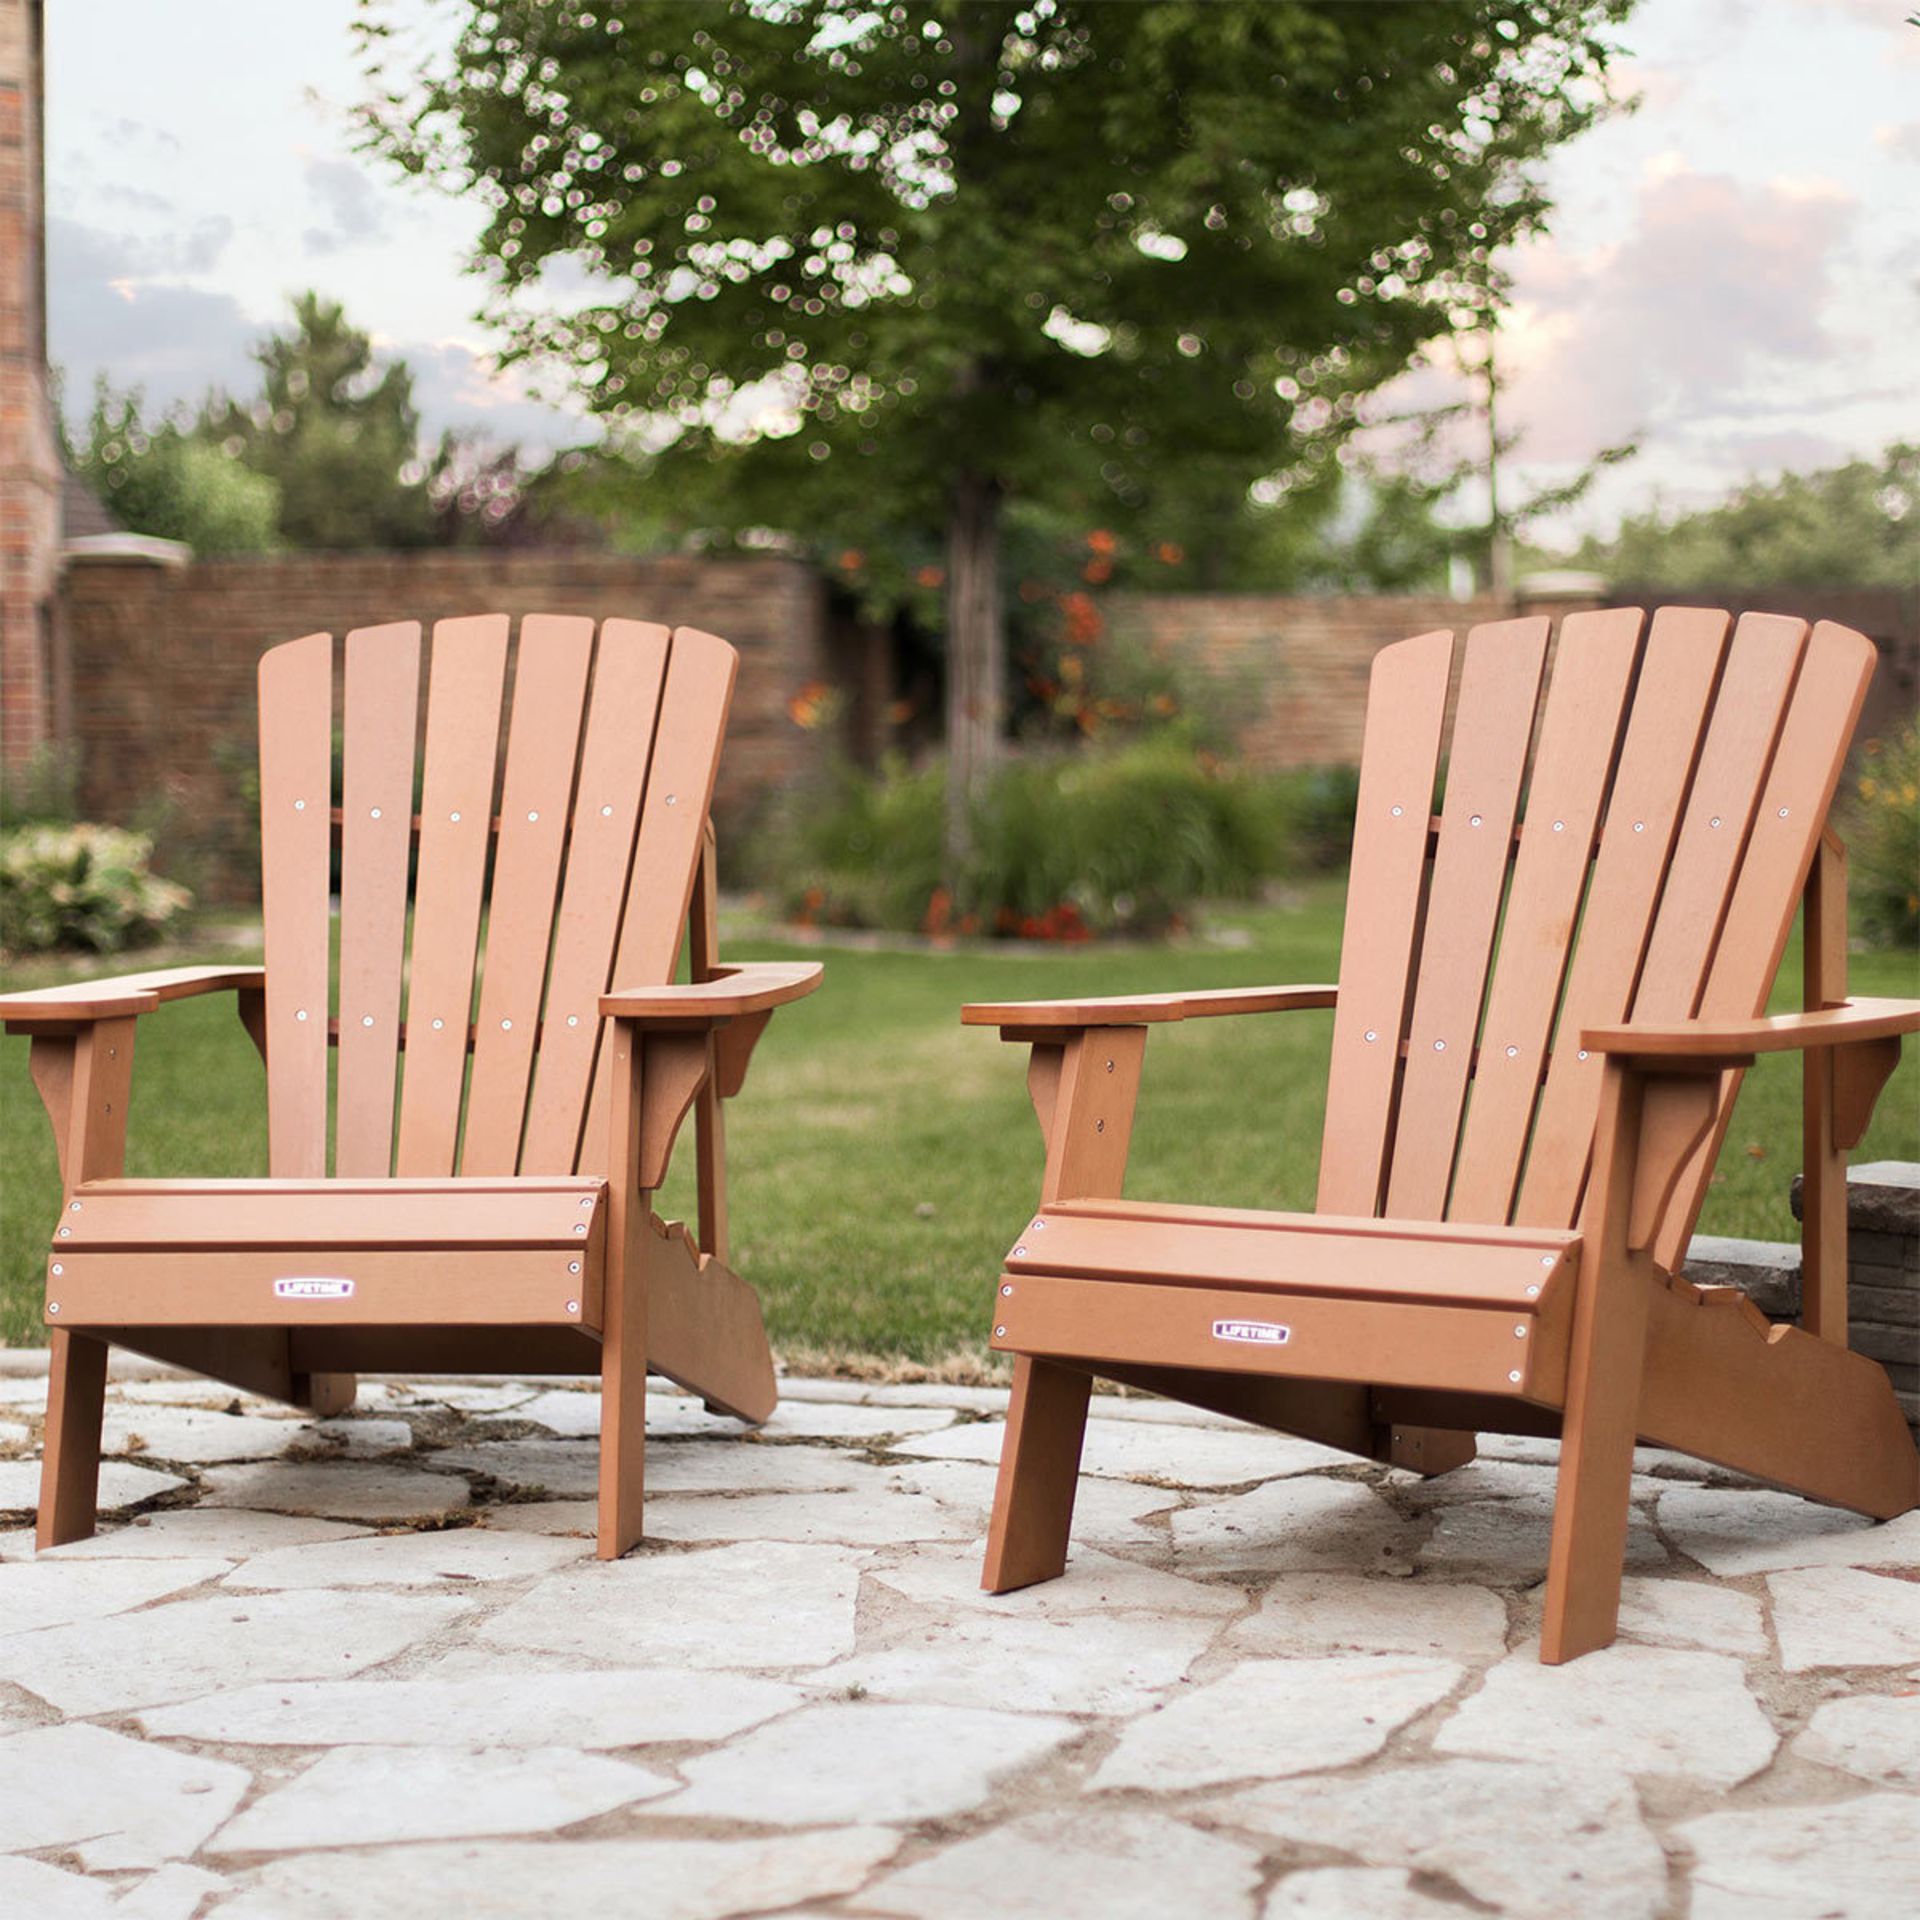 1 SET OF 2 LIFETIME ADIRONDACK CHAIRS RRP Â£399 (1 CHAIR IS DAMAGED)